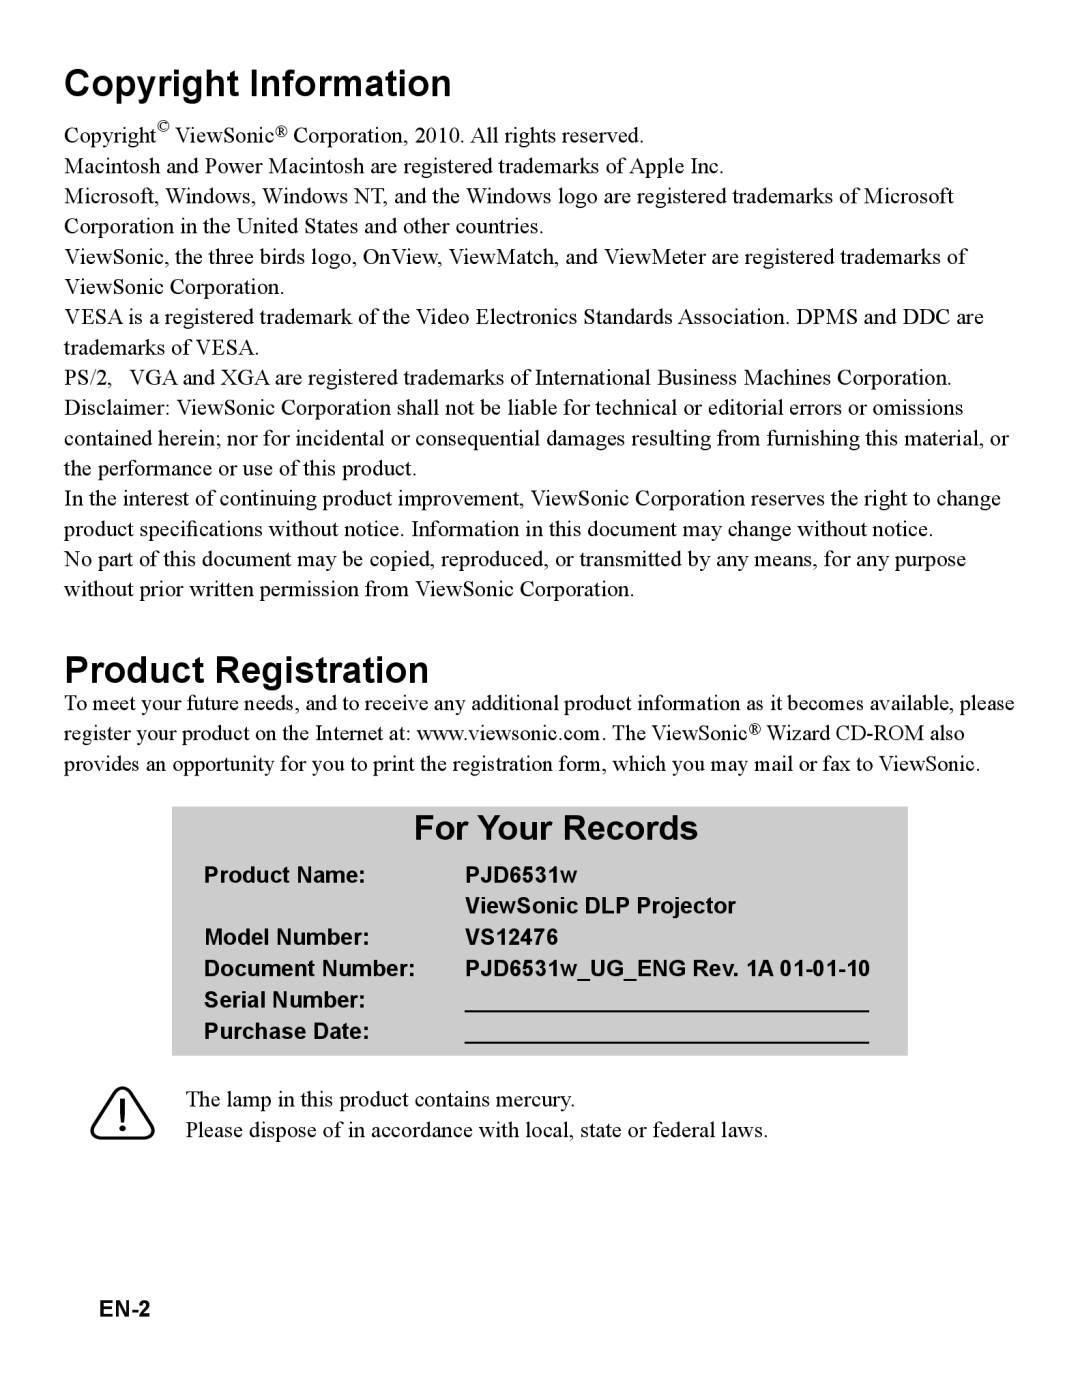 ViewSonic VS12476 Copyright Information, Product Registration, For Your Records, Product Name, PJD6531w, Model Number 